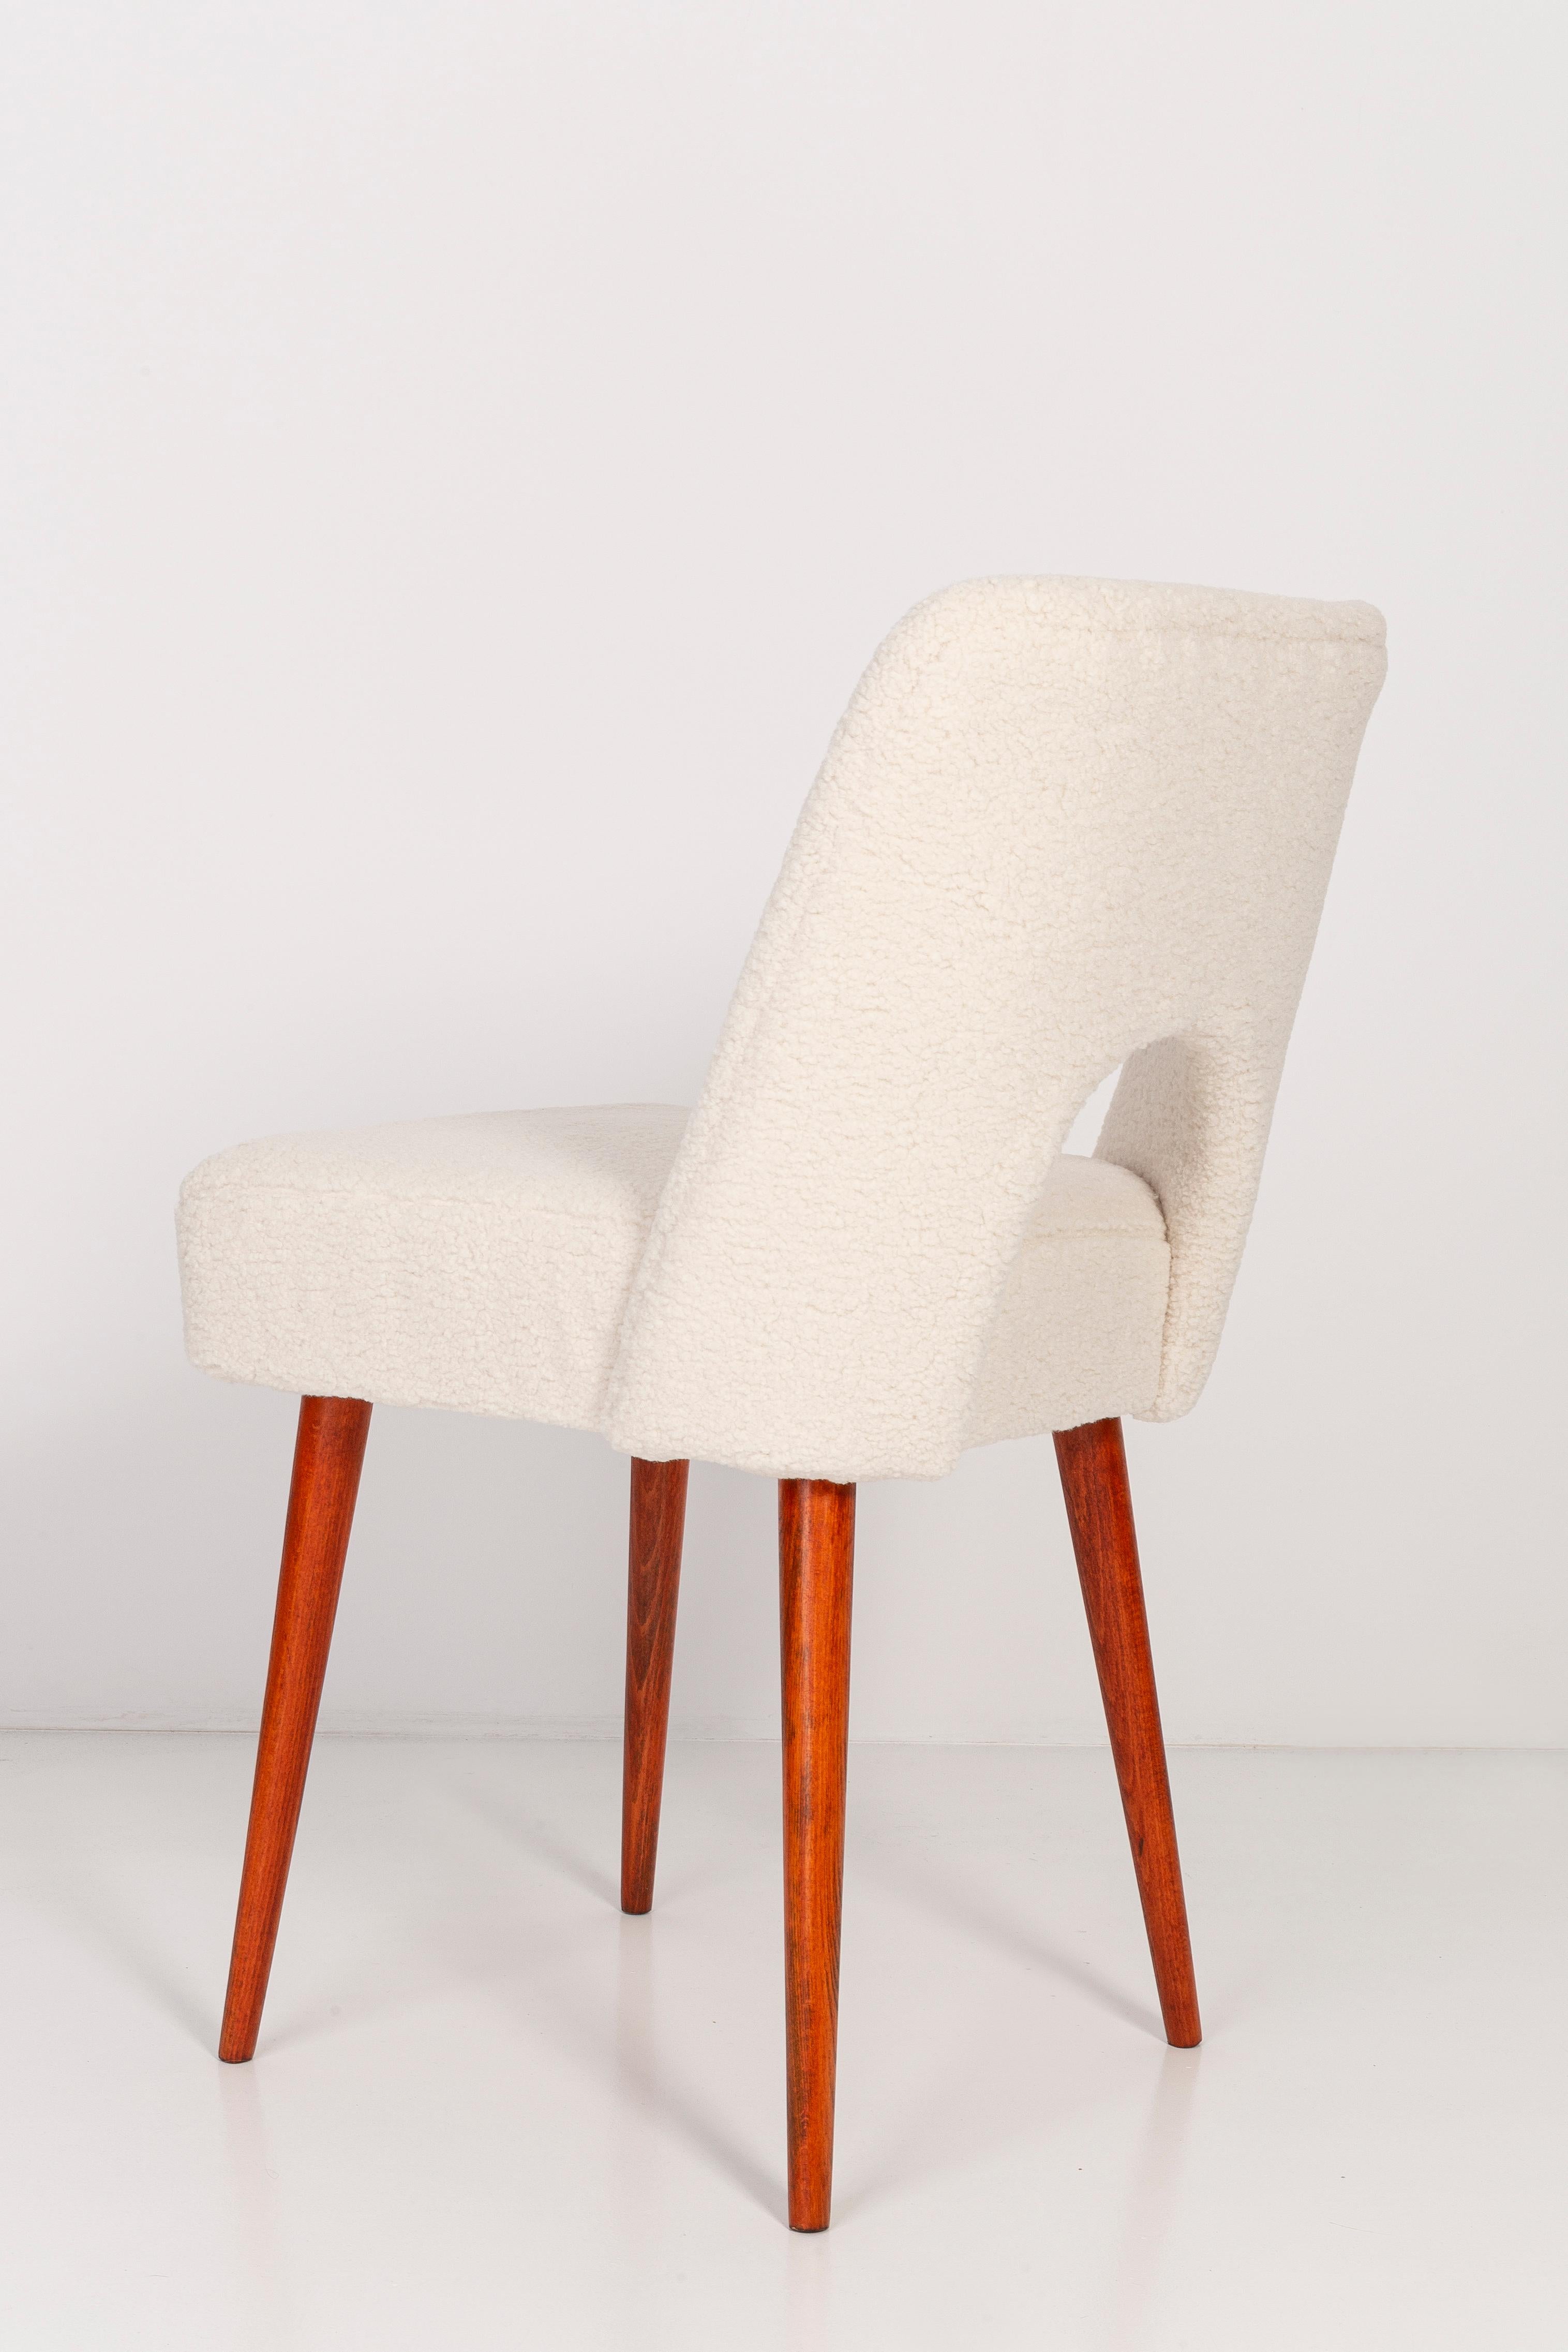 Set of Four Light Crème Boucle 'Shell' Chairs, 1960s For Sale 2